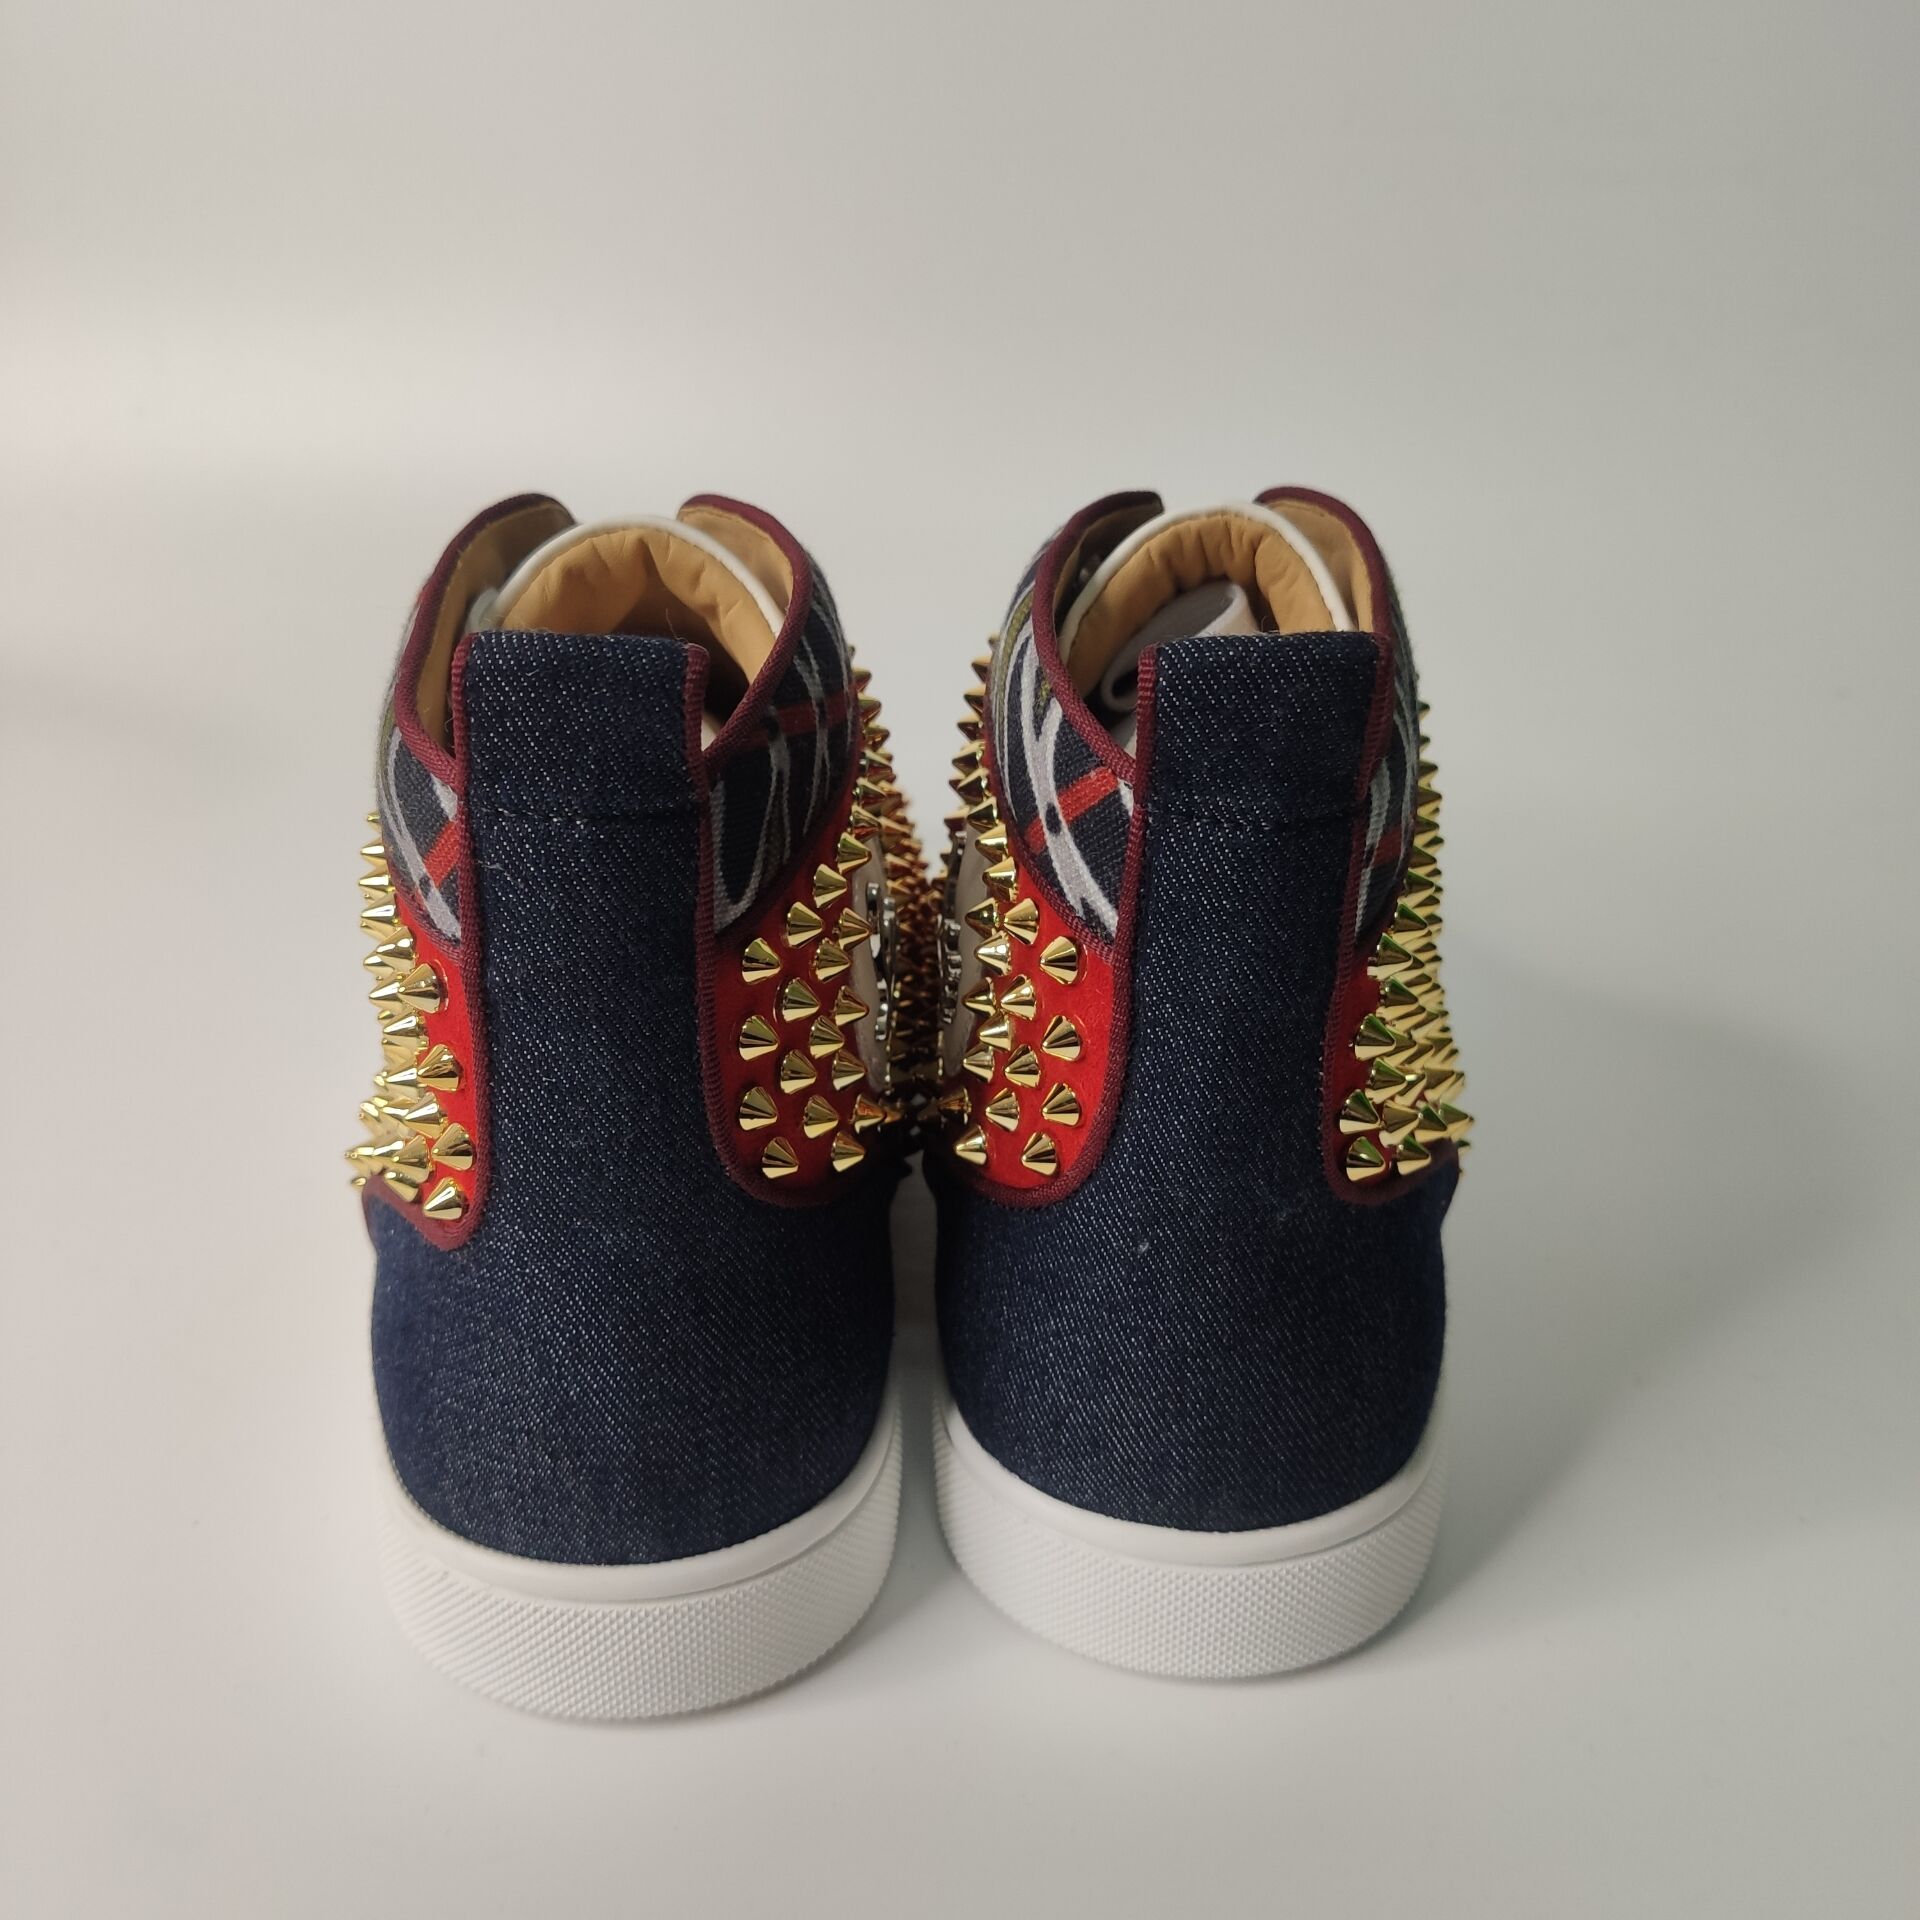 High Quality Christian Louboutin Flat Red Suede Golden Spikes High Top Sneakers